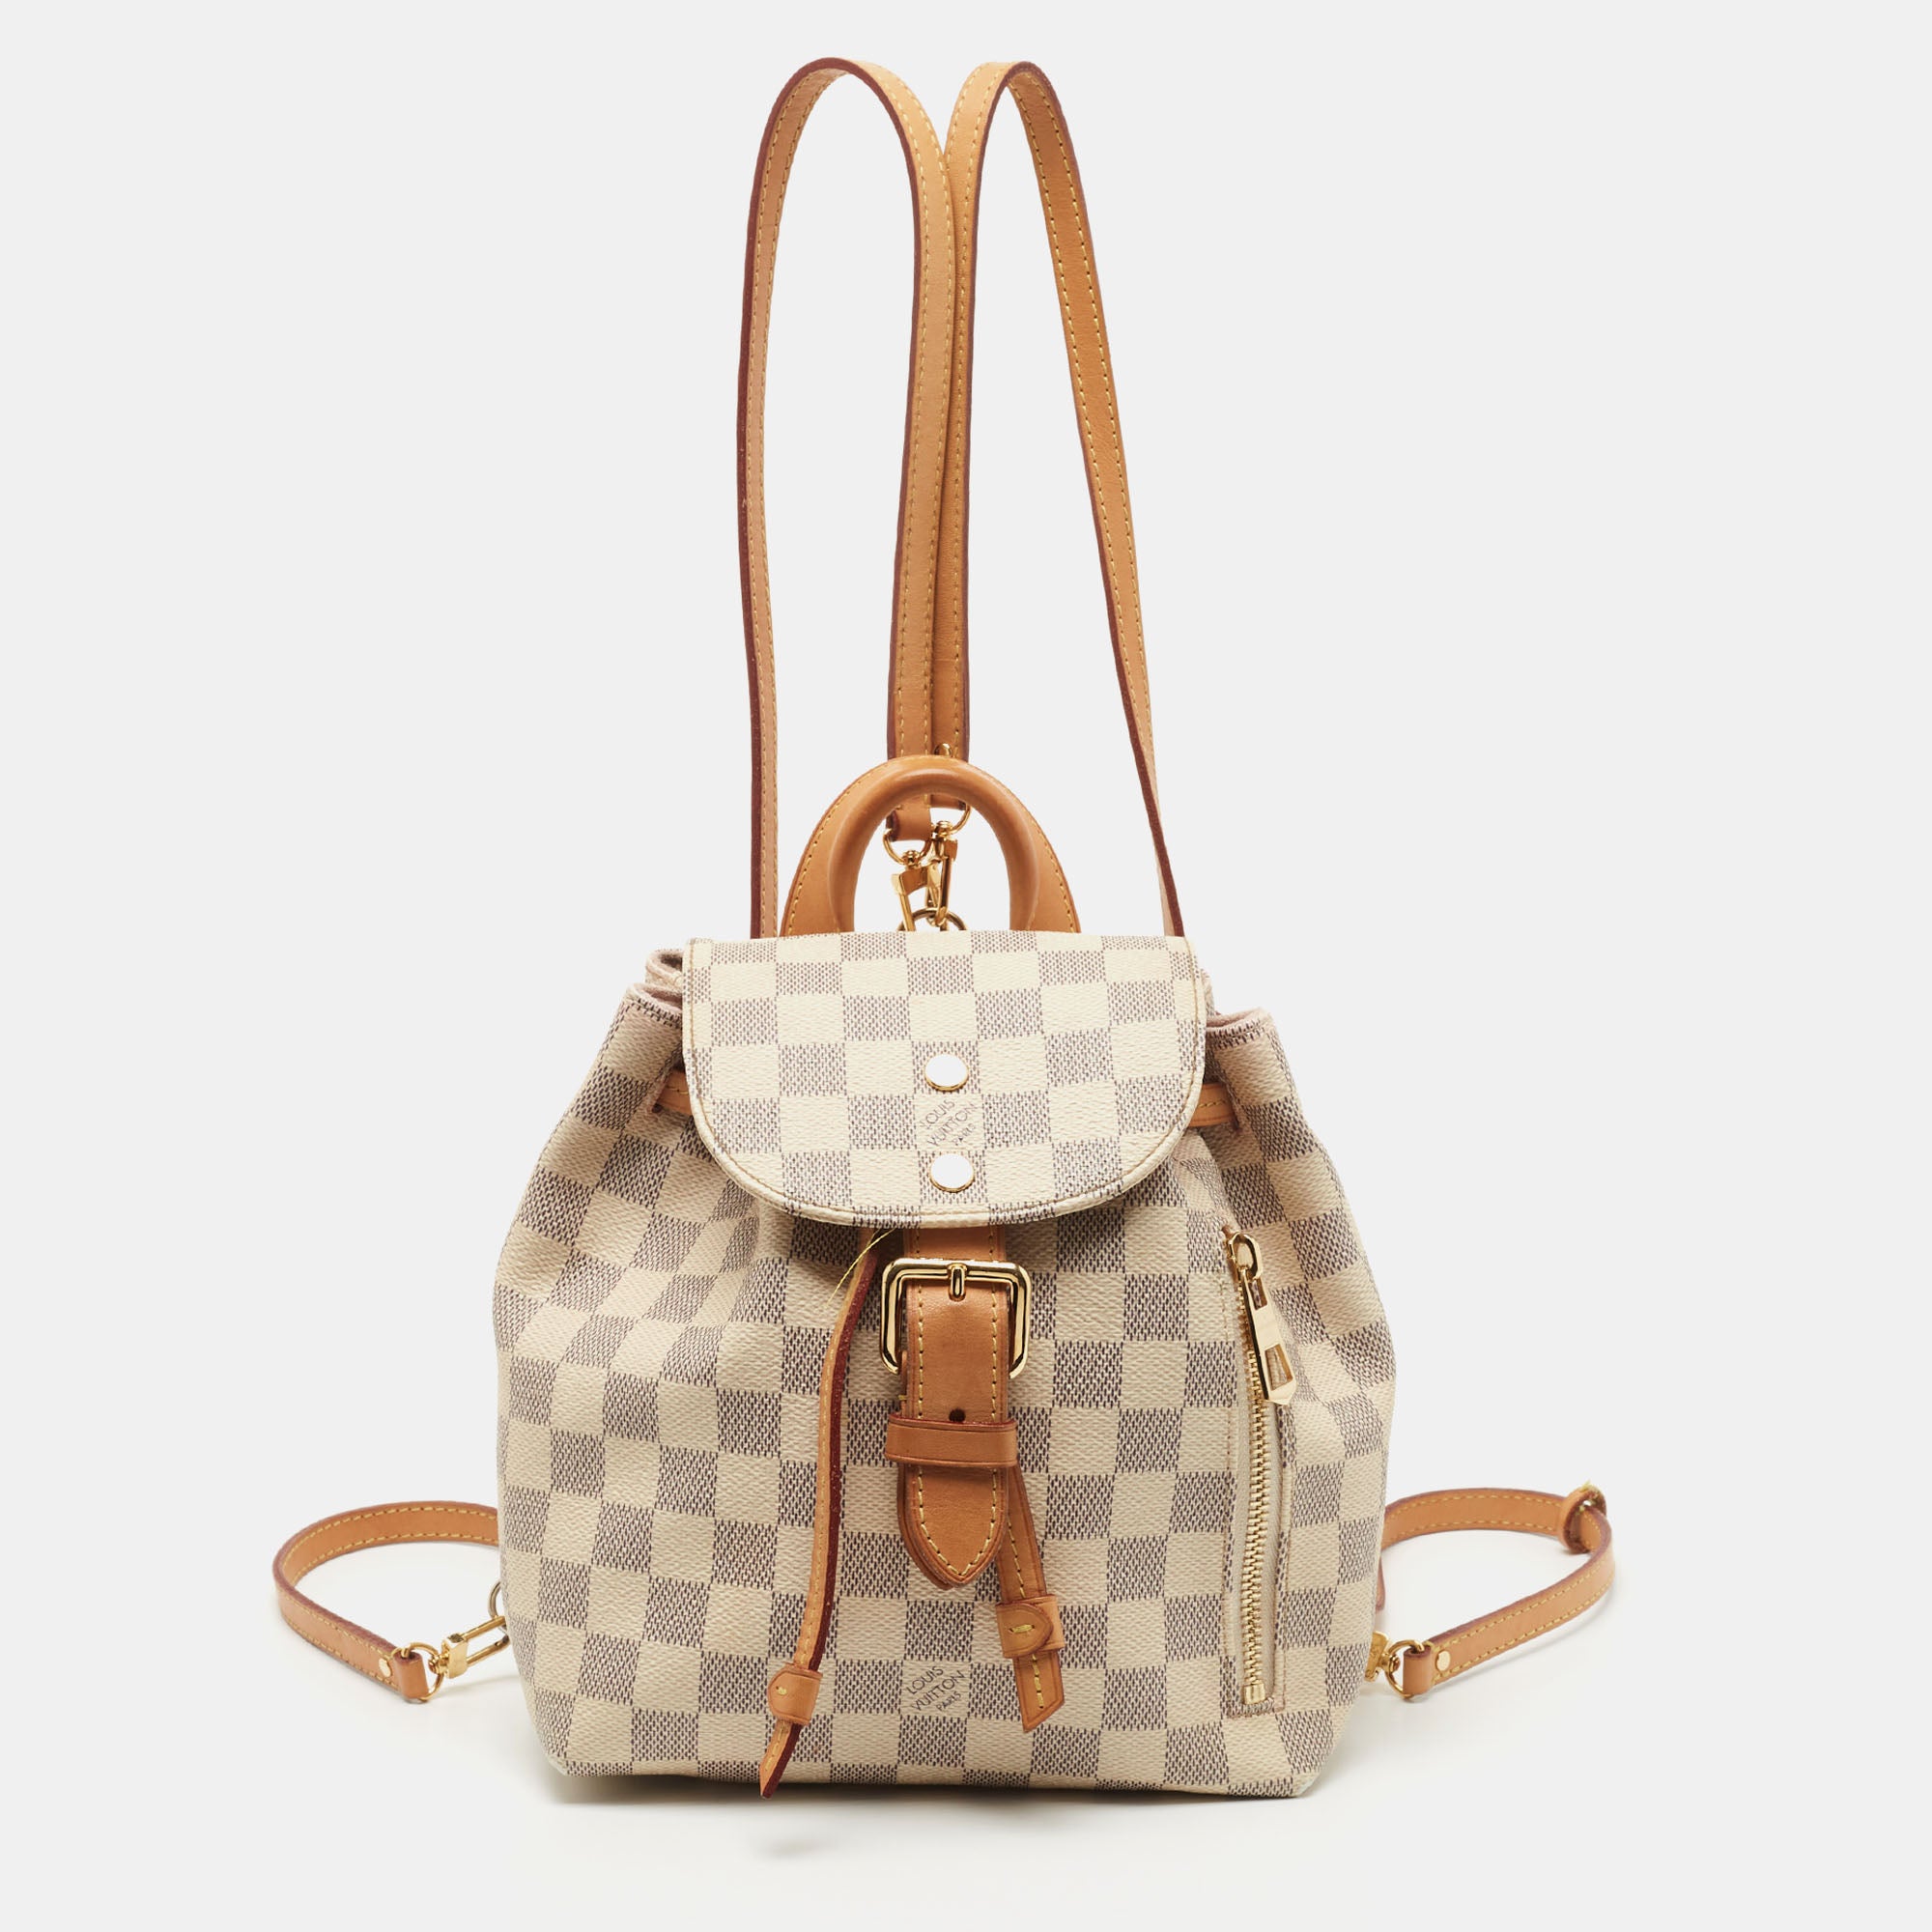 LOUIS VUITTON Damier Azur Sperone Backpack USED